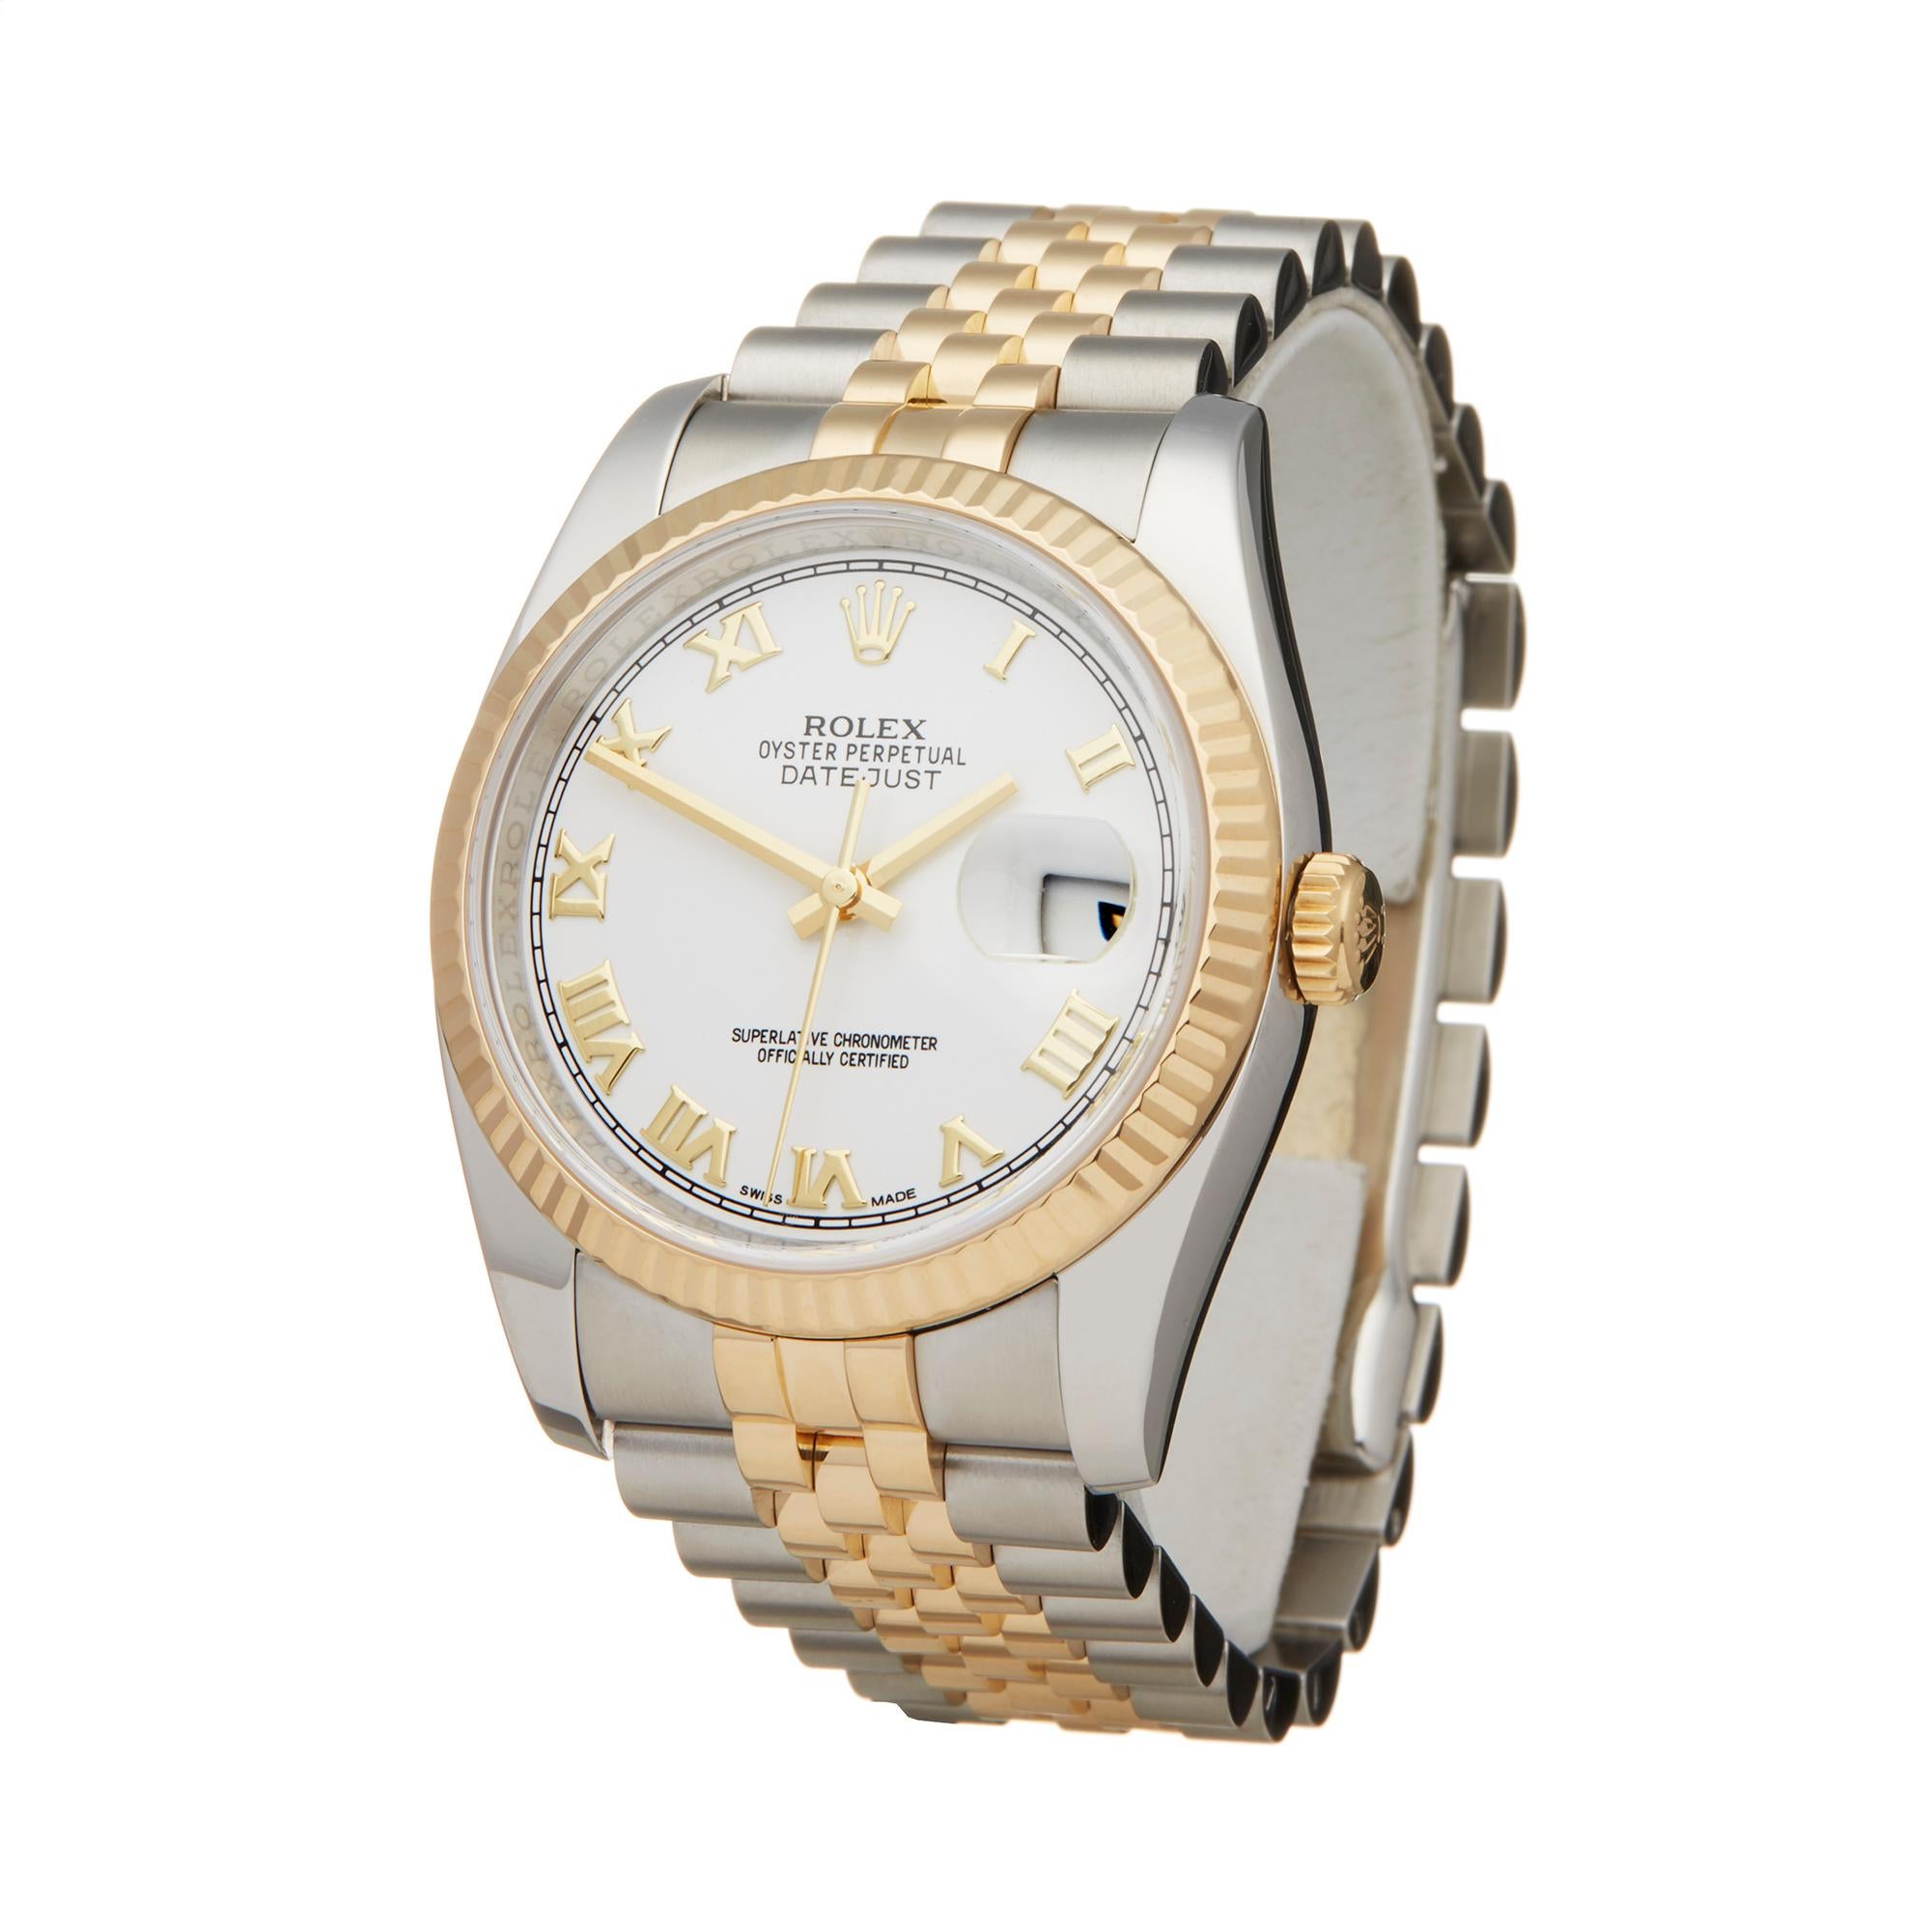 Reference: W6073
Manufacturer: Rolex
Model: Datejust
Model Reference: G524258
Age: 27th June 2012
Gender: Men's
Box and Papers: Box, Manuals and Guarantee
Dial: White Roman
Glass: Sapphire Crystal
Movement: Automatic
Water Resistance: To